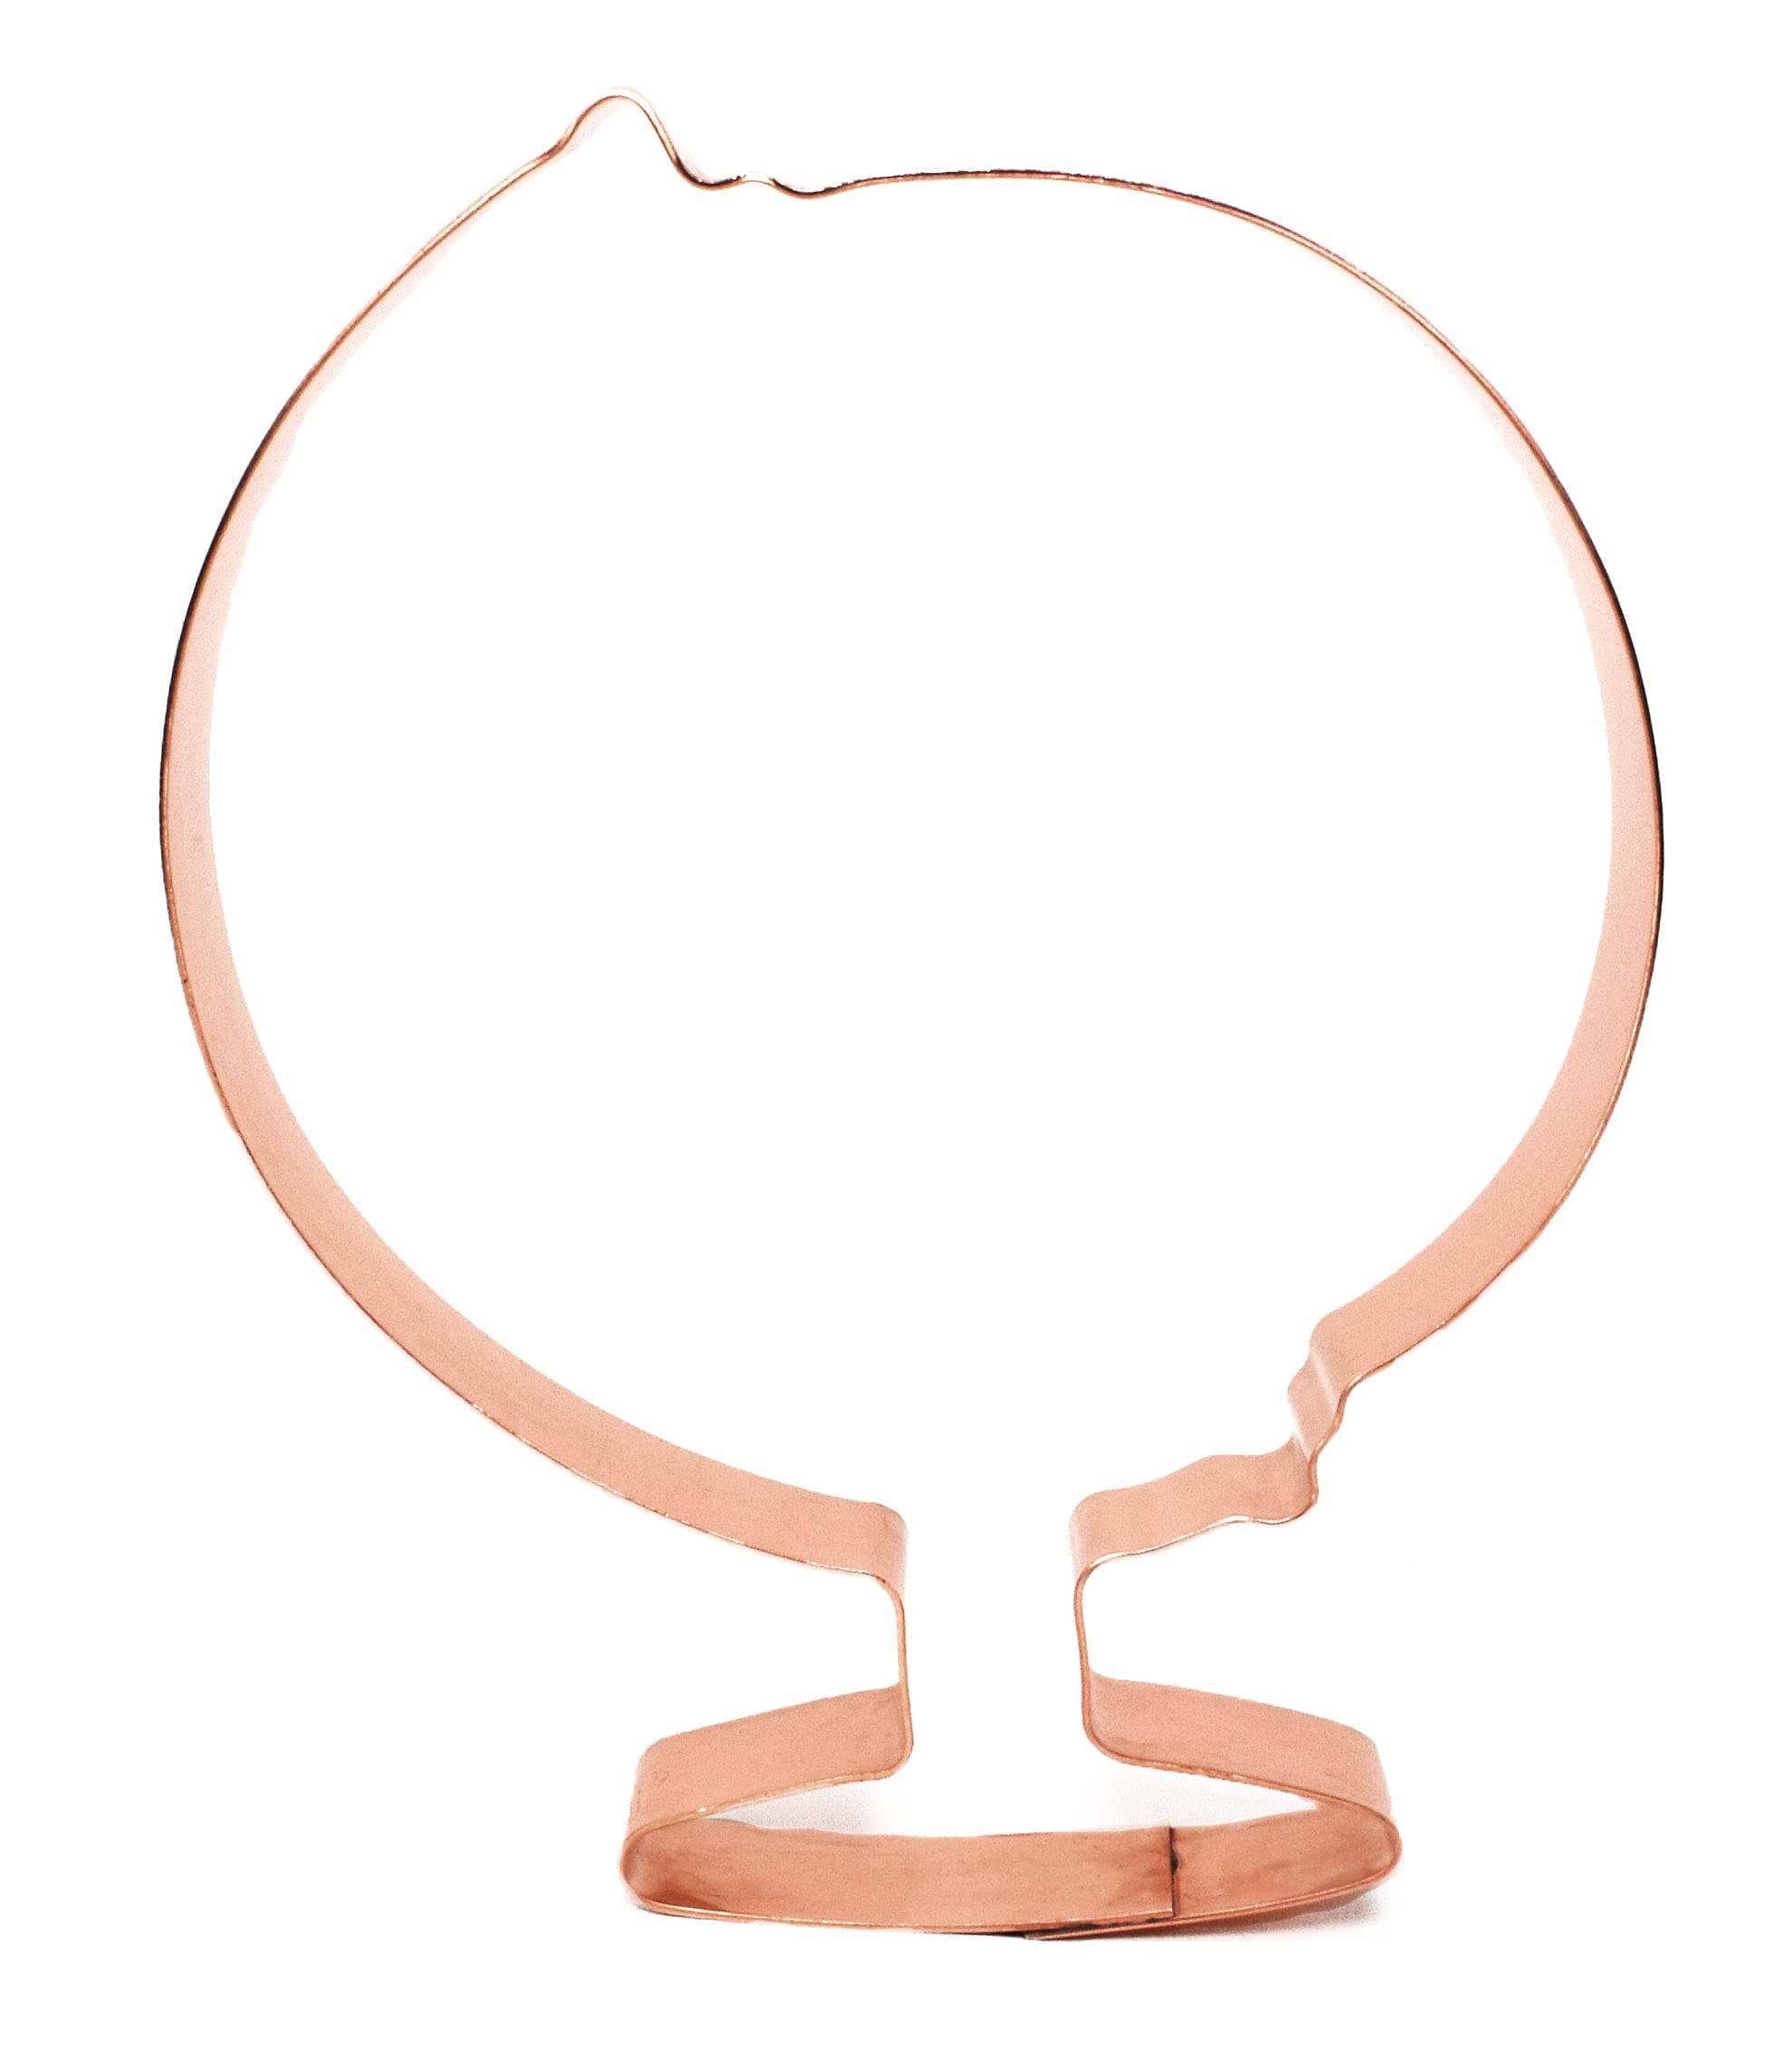 World Globe Cookie Cutter 4.25 X 5.25 inches - Handcrafted Copper Cookie Cutter by The Fussy Pup